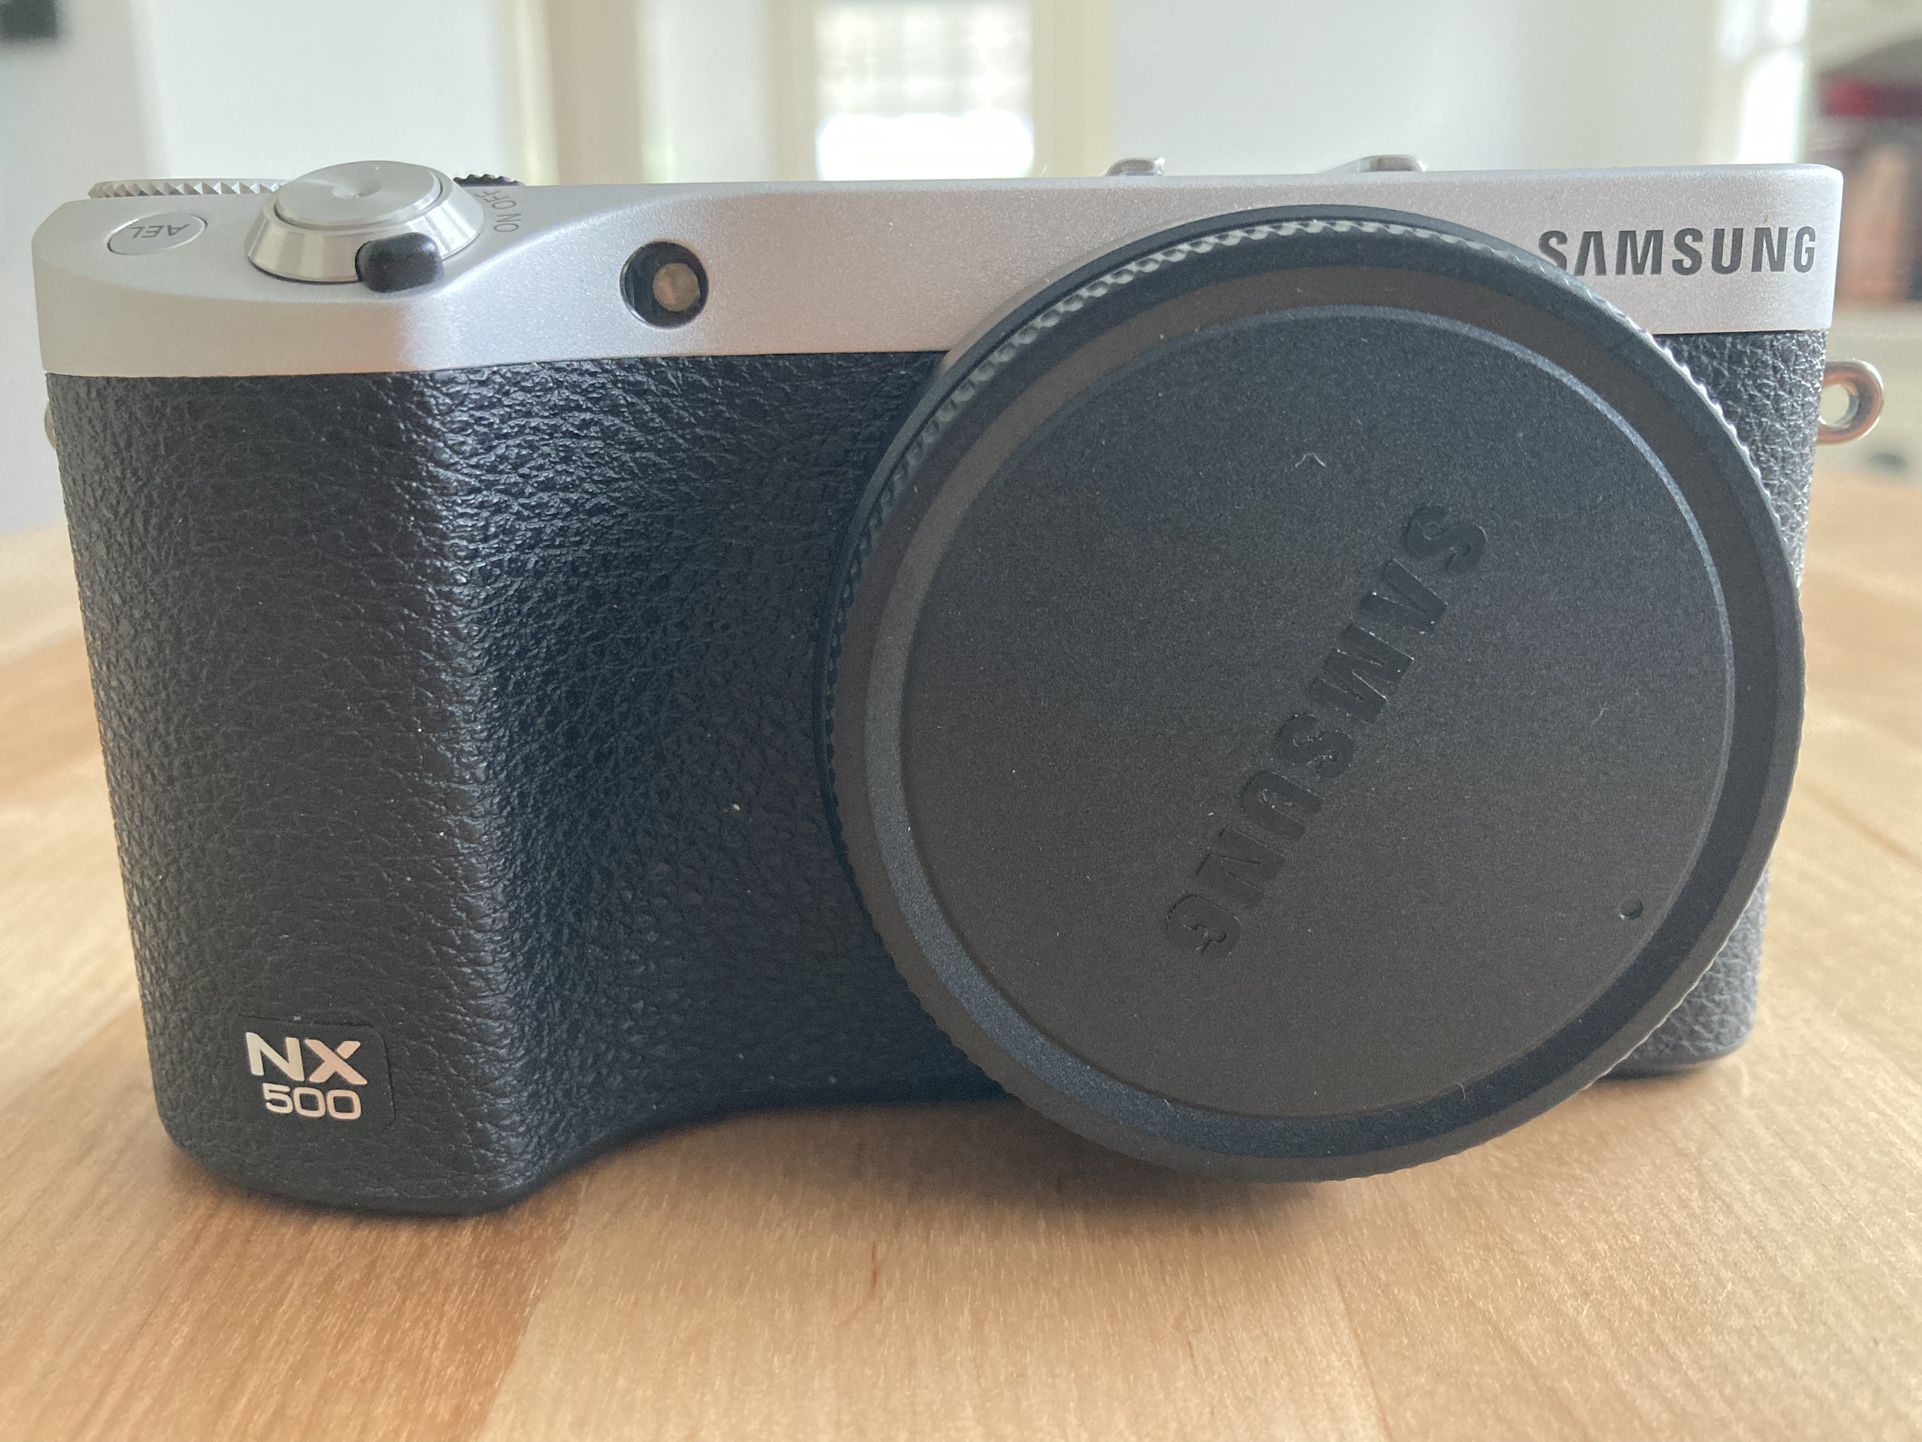 Samsung NX500 Body w/ Batteries, Charger & 32GB Card 